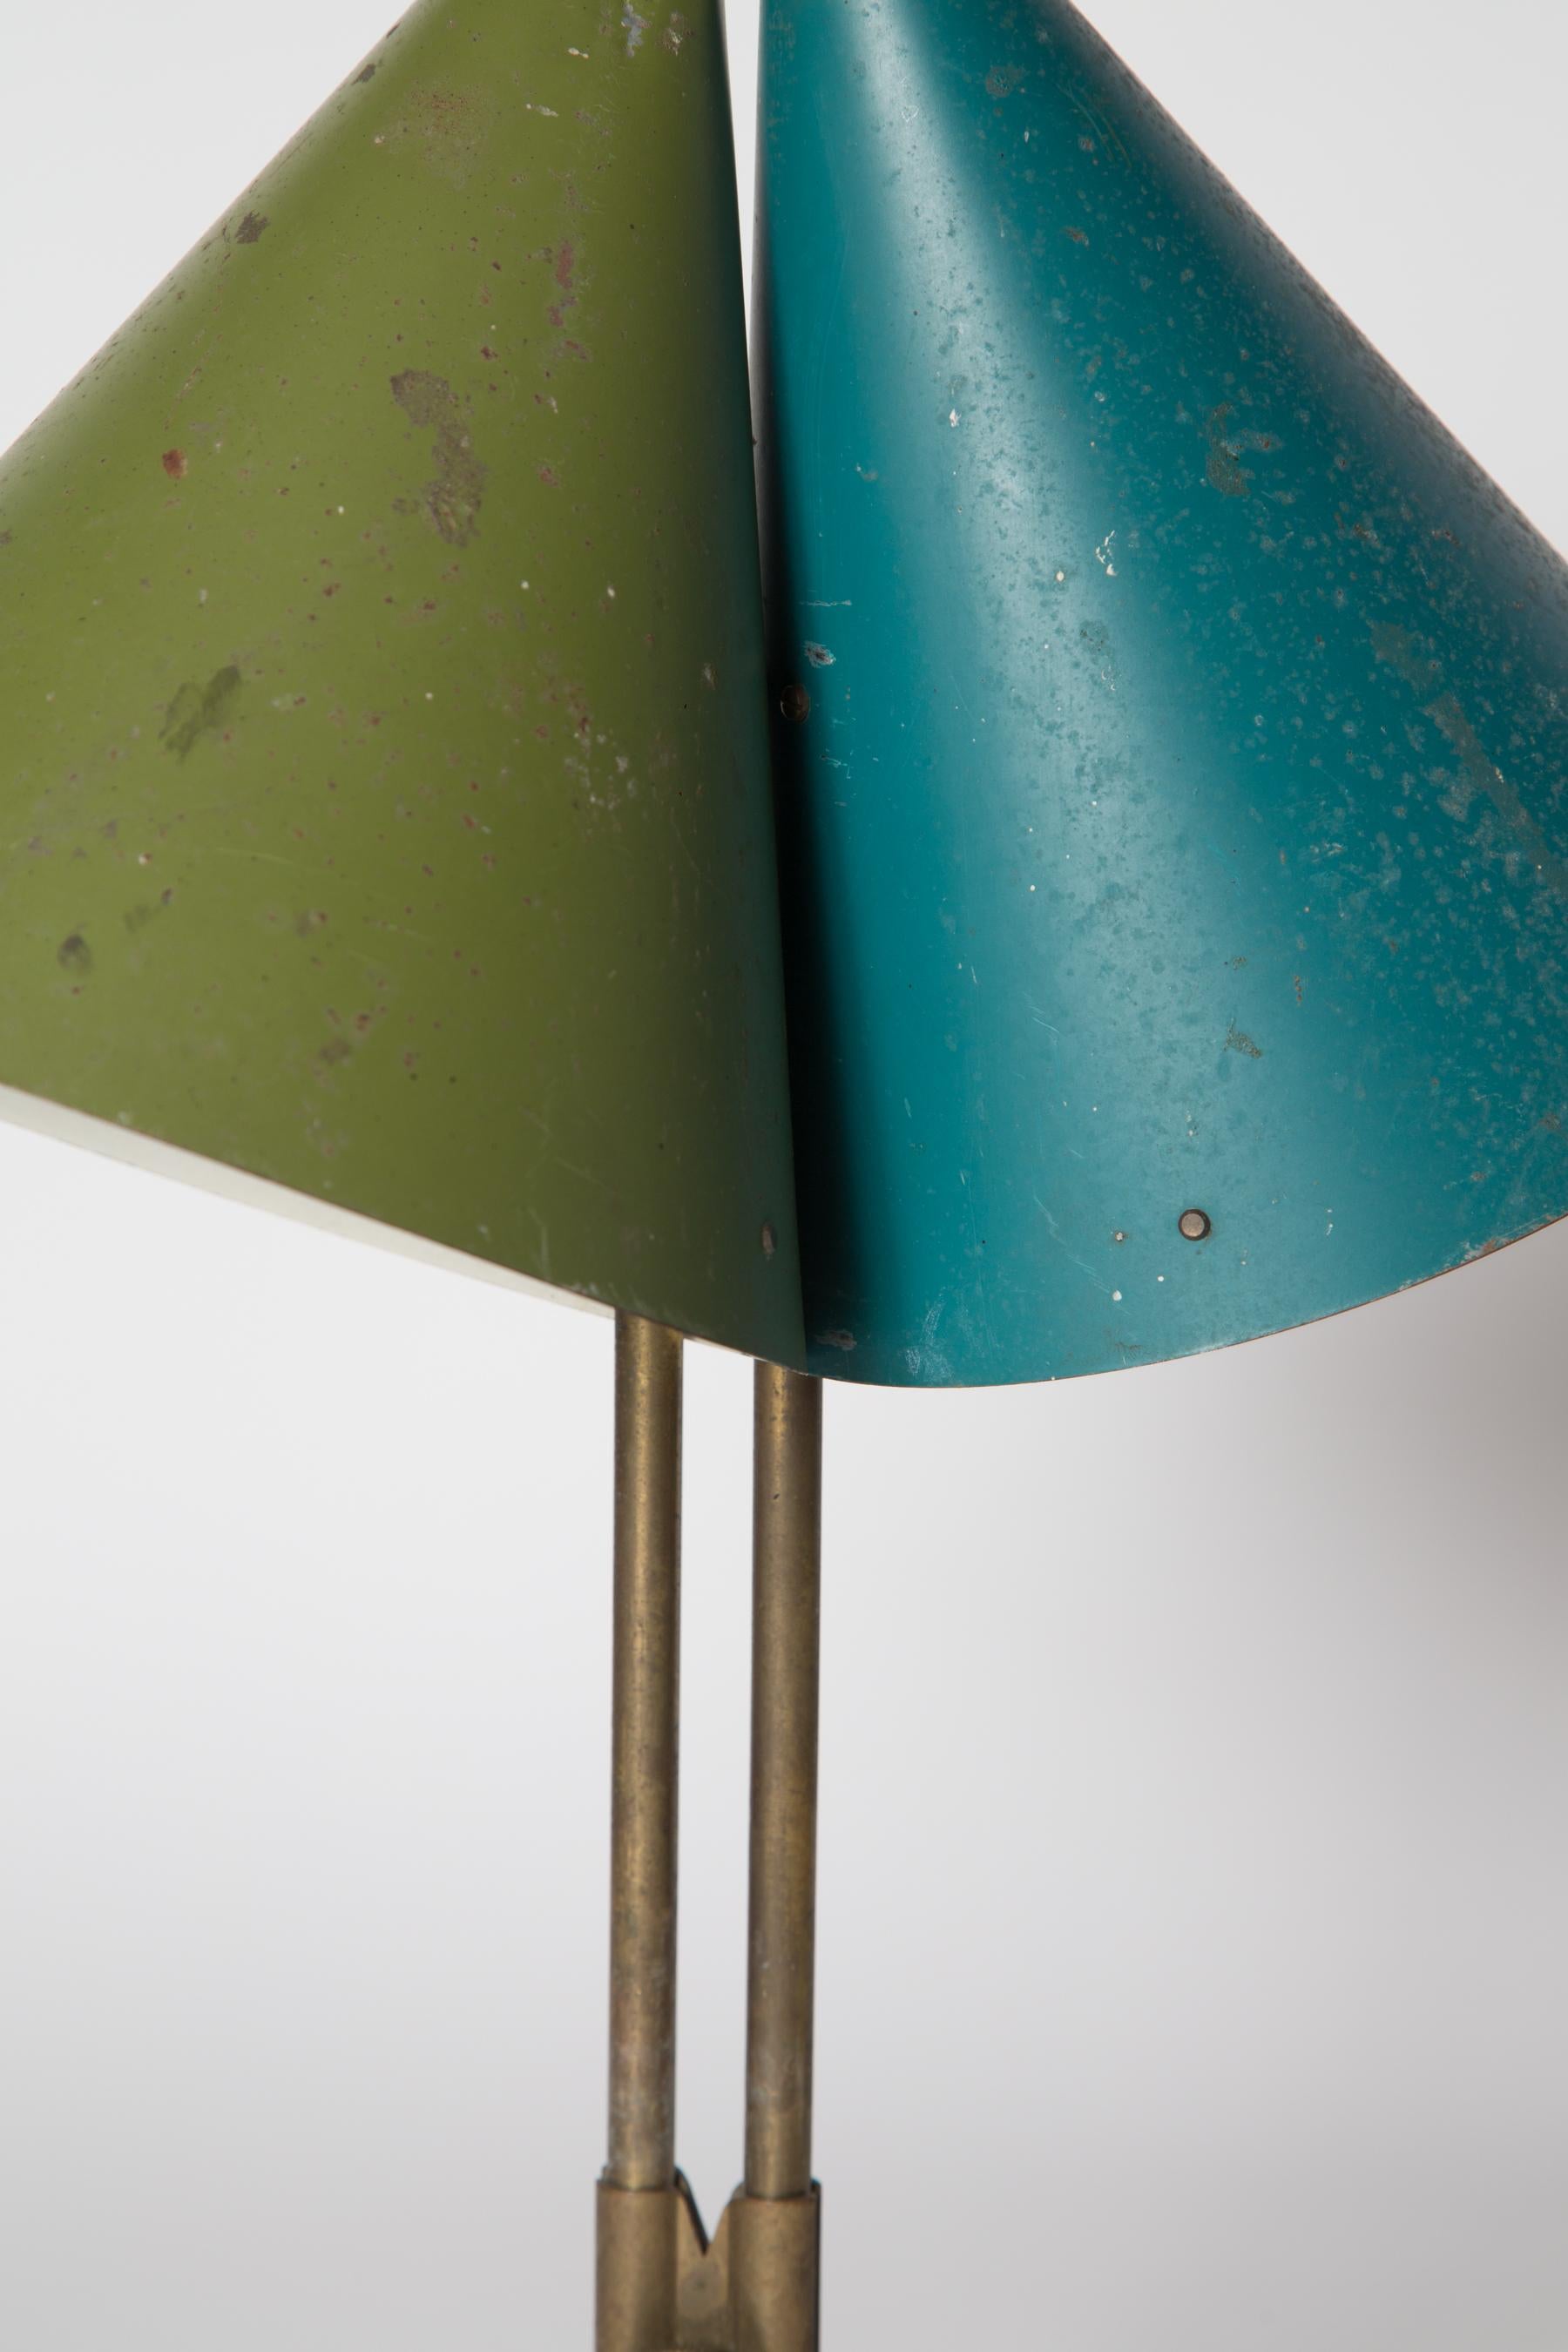 1959 Bent Karlby 'Mosaik' Adjustable Brass & Lacquered Metal Table Lamp for Lyfa 5